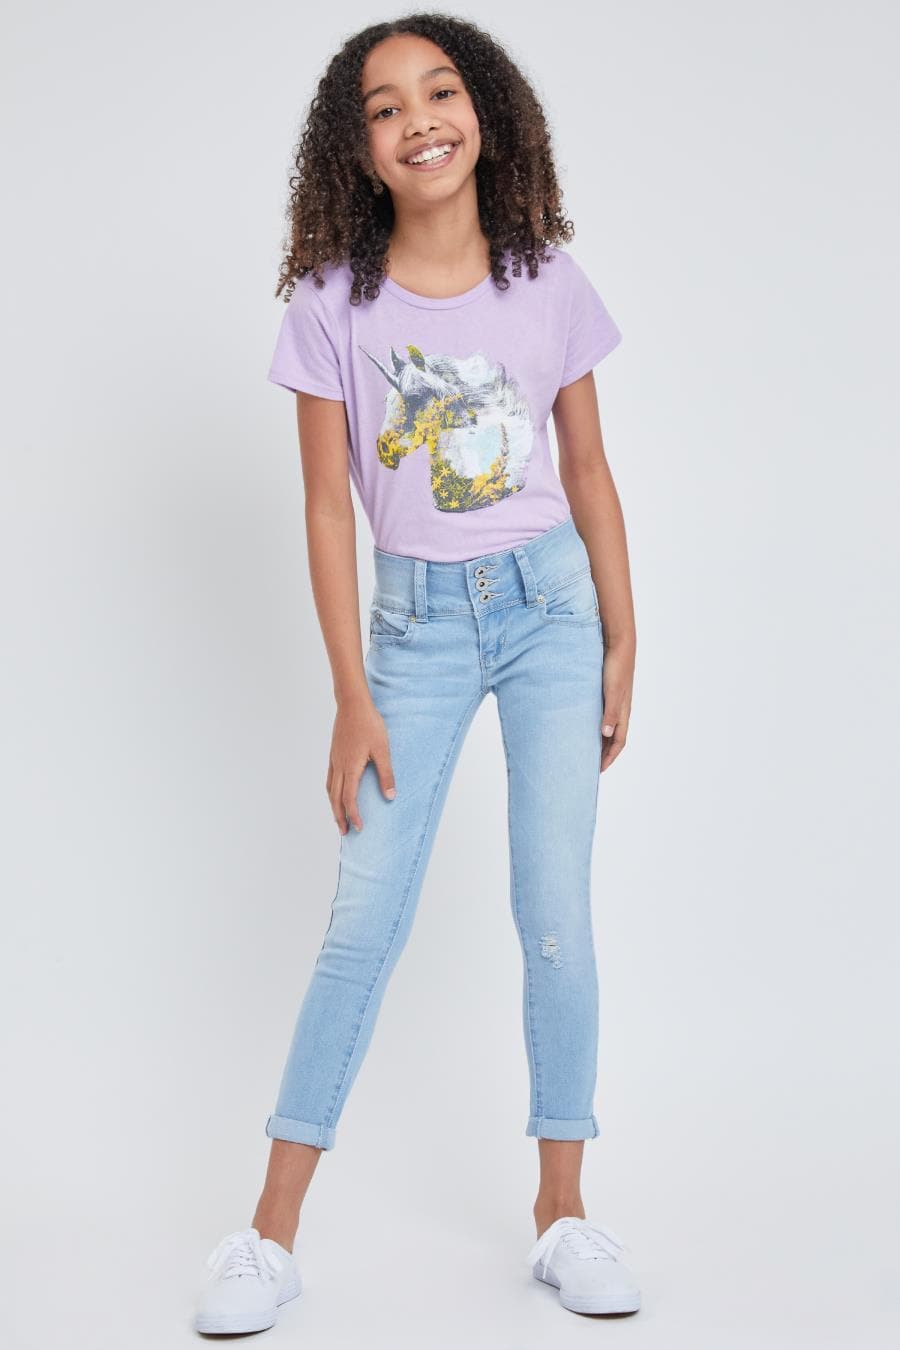 Girls 3 Button Skinny Jeans